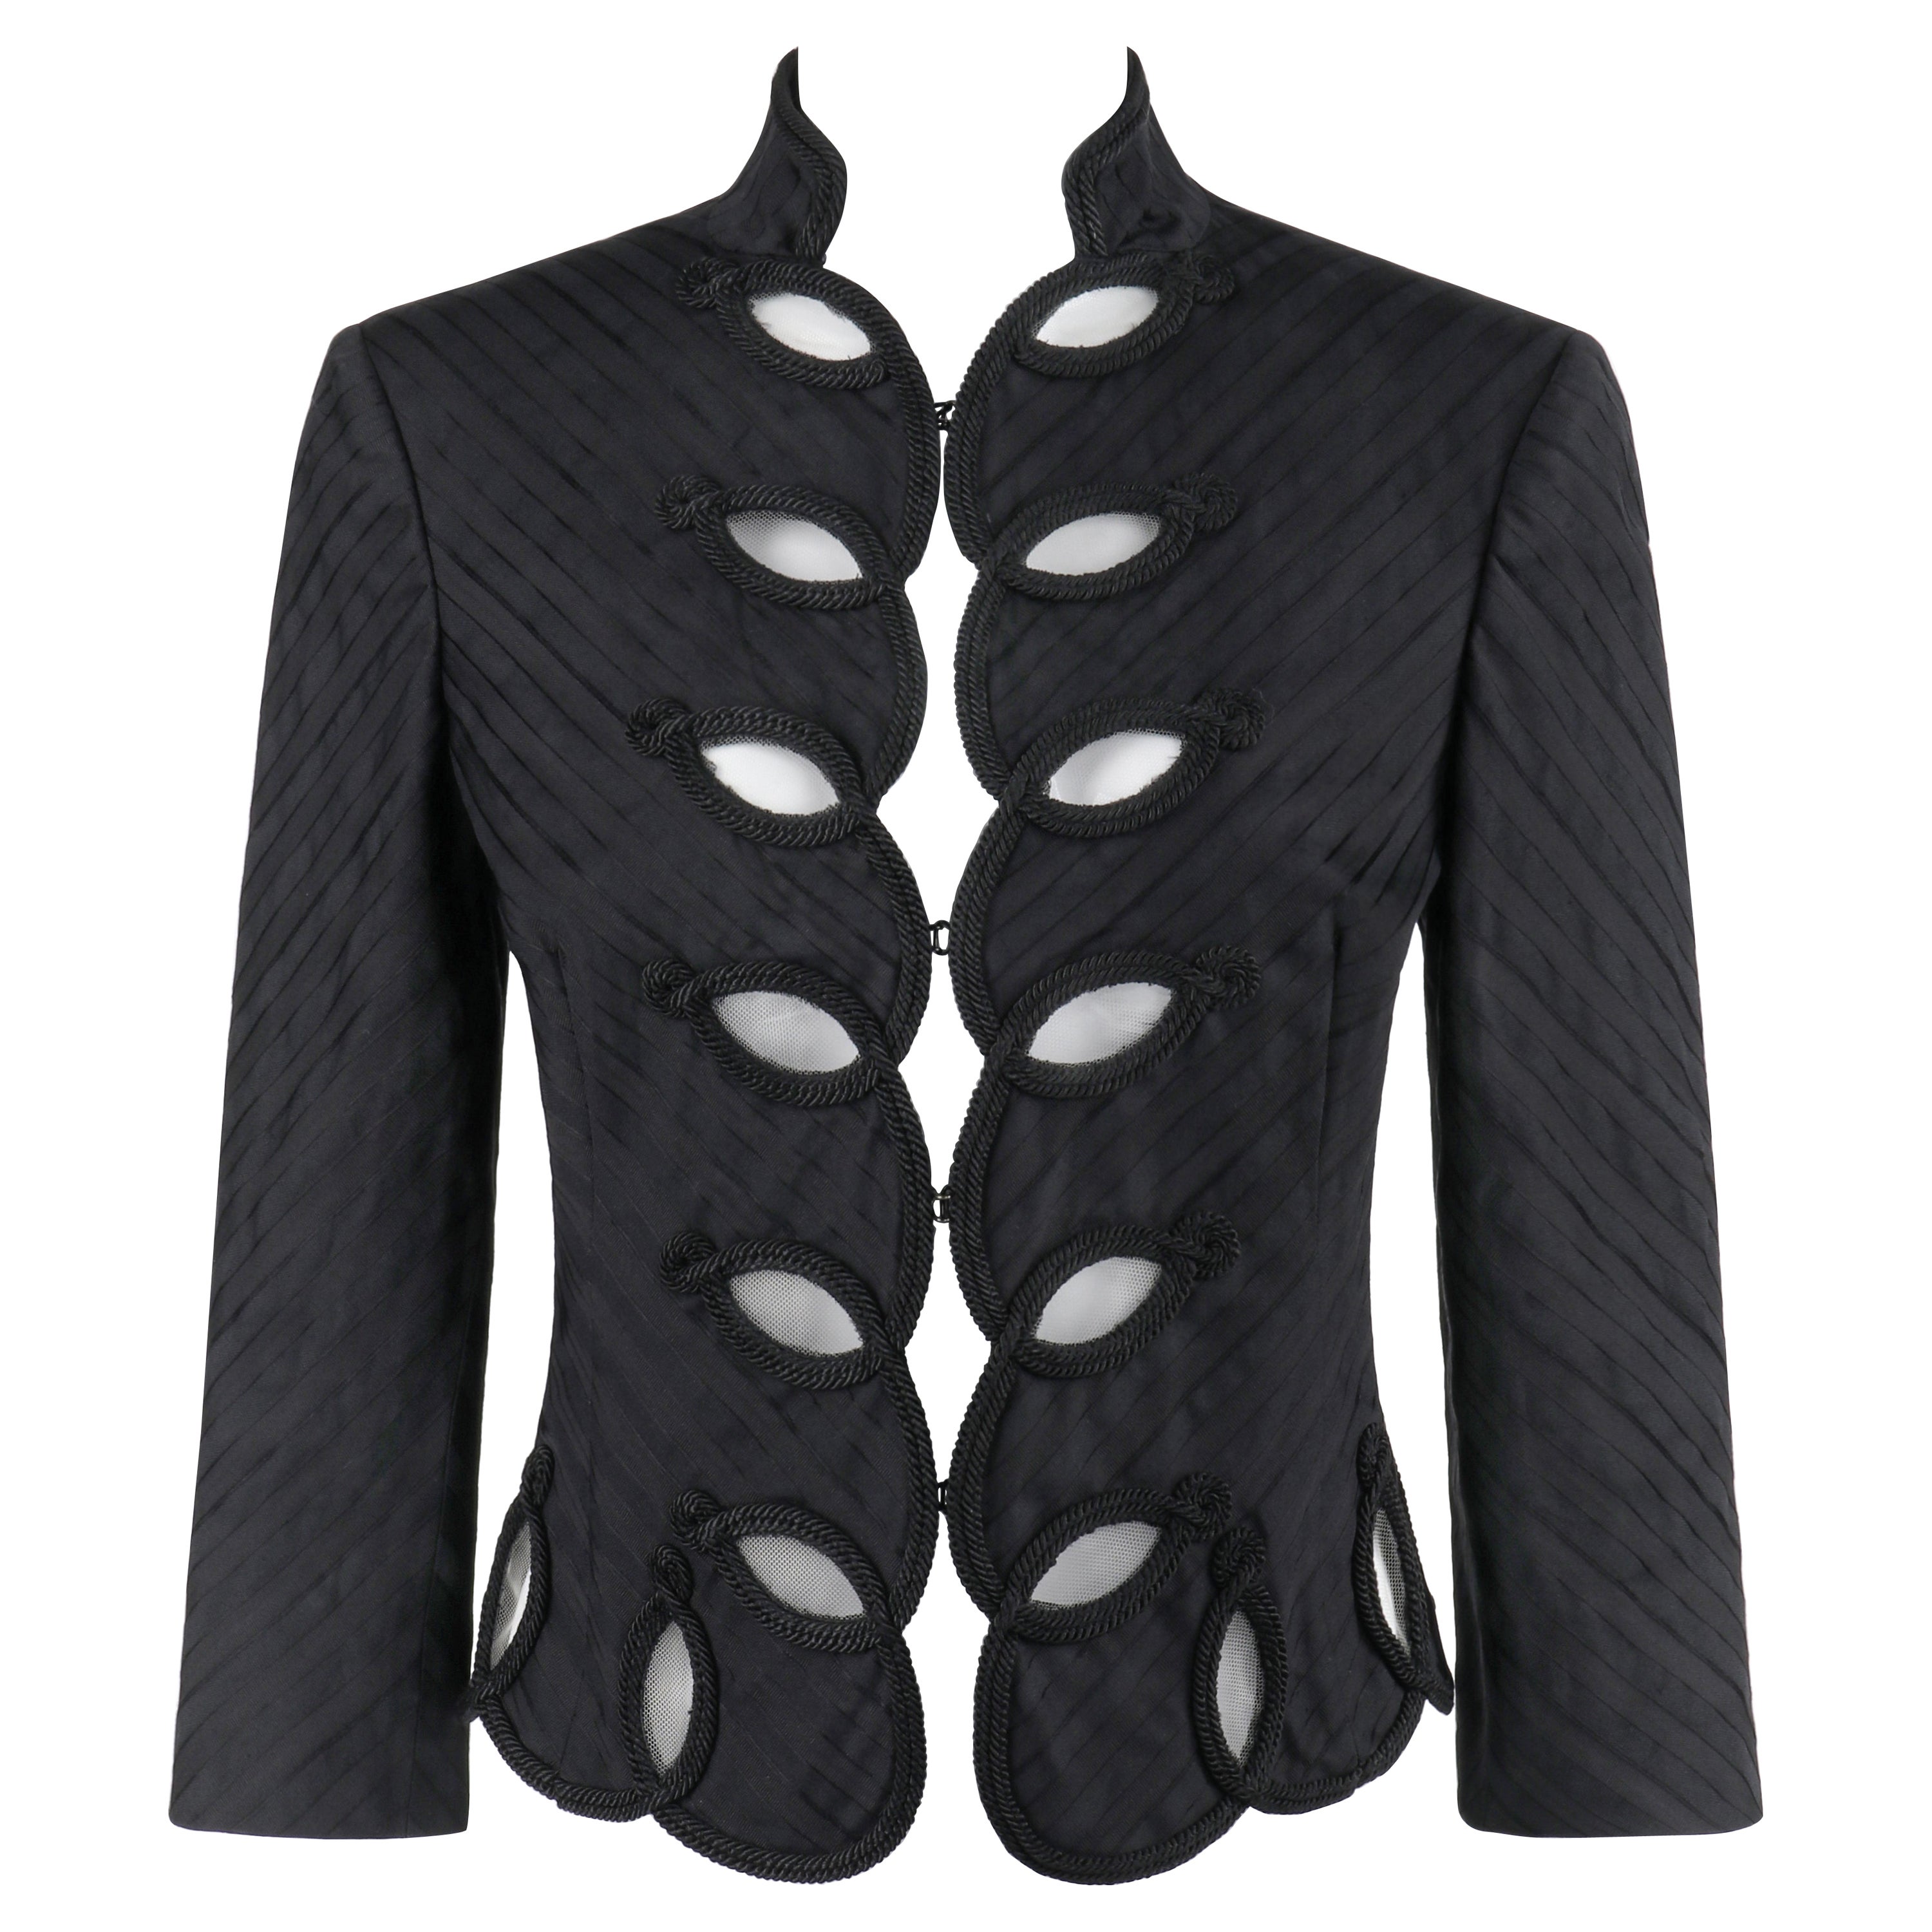 ALEXANDER McQUEEN S/S 2005 "It's Only A Game" Black Eyelet Trim Collared Jacket For Sale